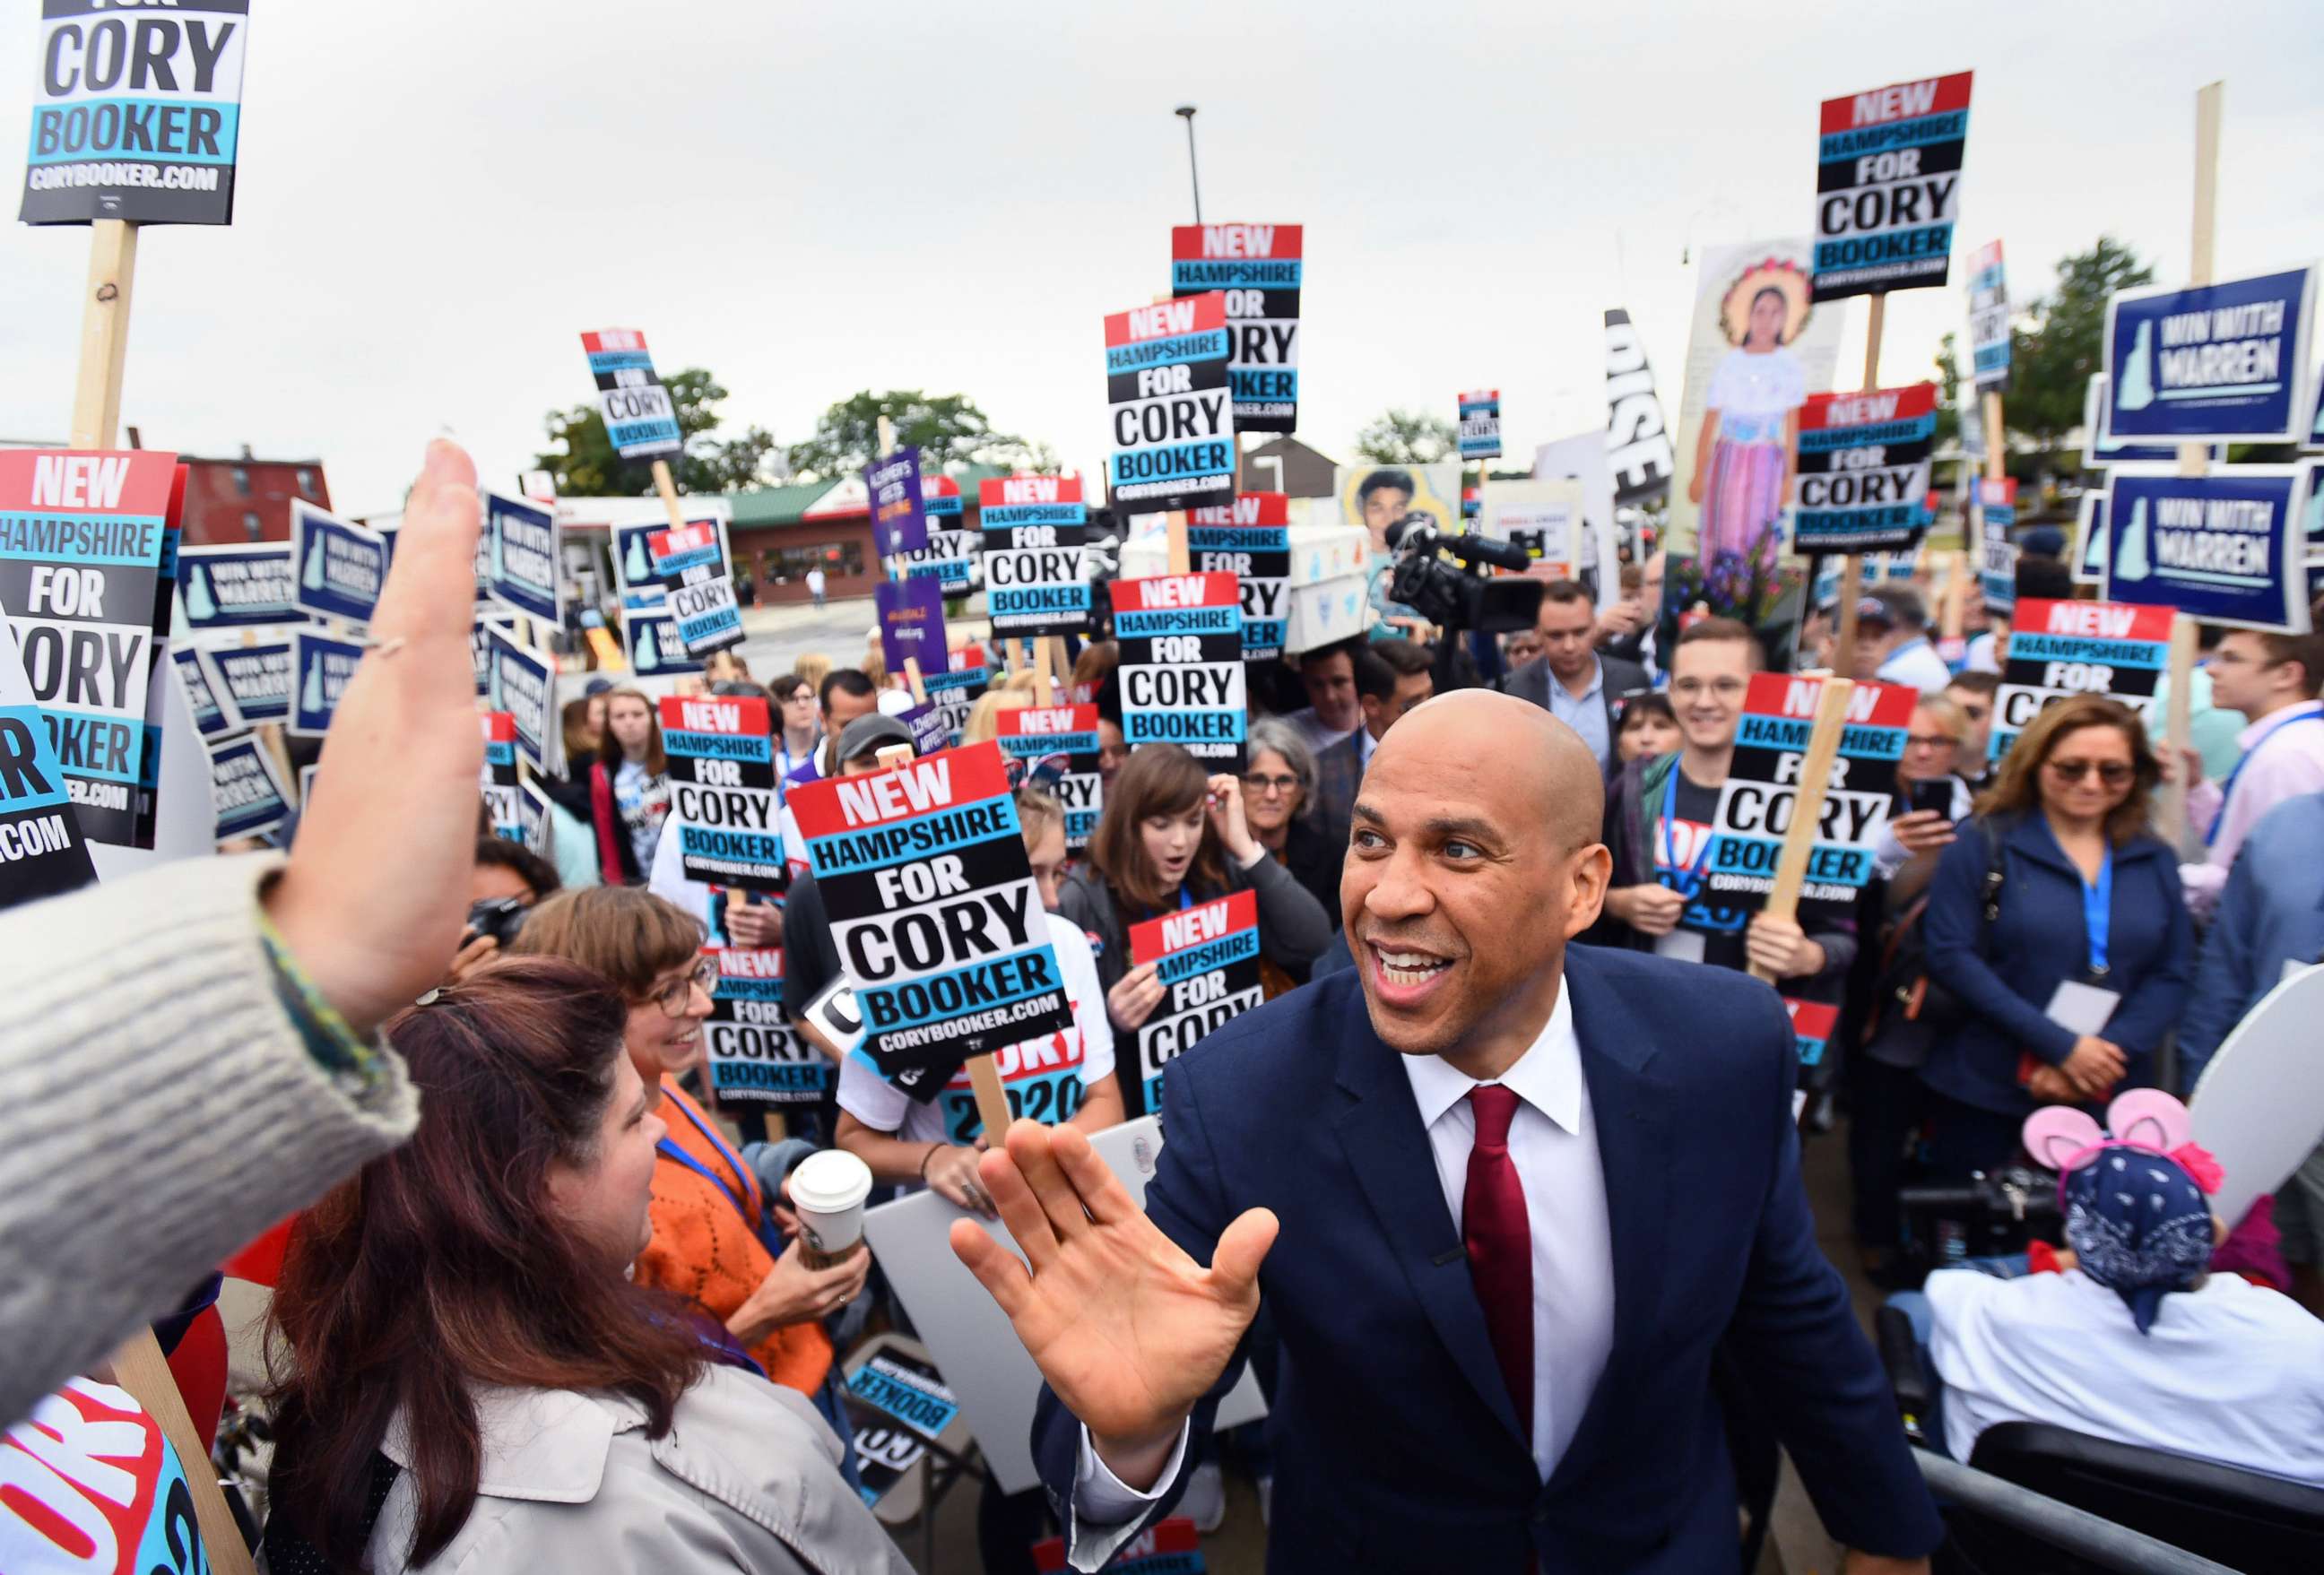 PHOTO: Democratic presidential candidate and Senator Cory Booker greets supporters at the New Hampshire Democratic Party state convention in Manchester, N.H., Sept. 7, 2019.